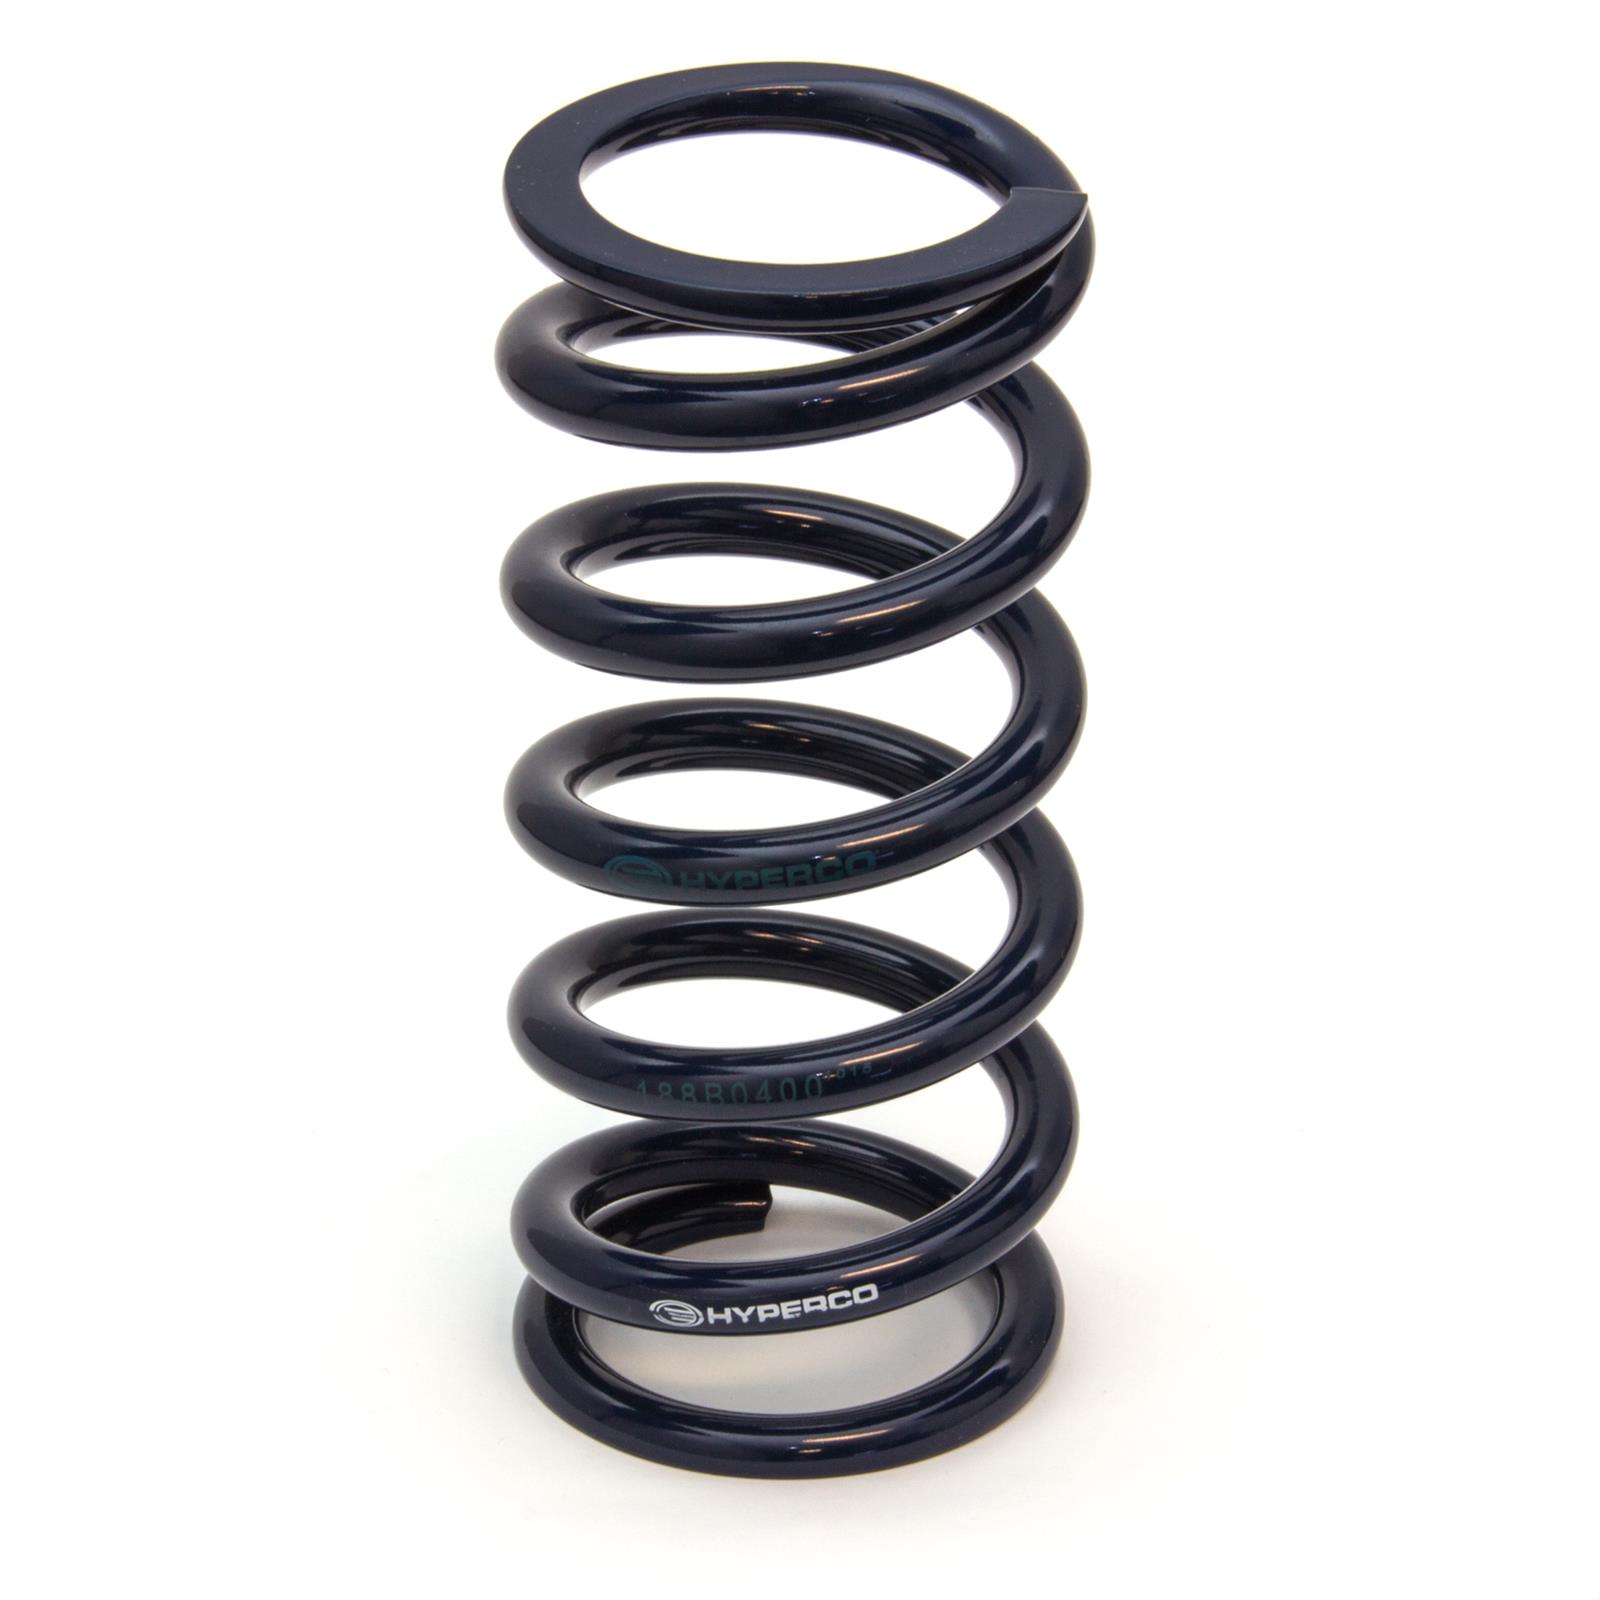 750 lb Rate Hyperco 1810B0750 2.5 ID Coil-Over 10 Racing Spring